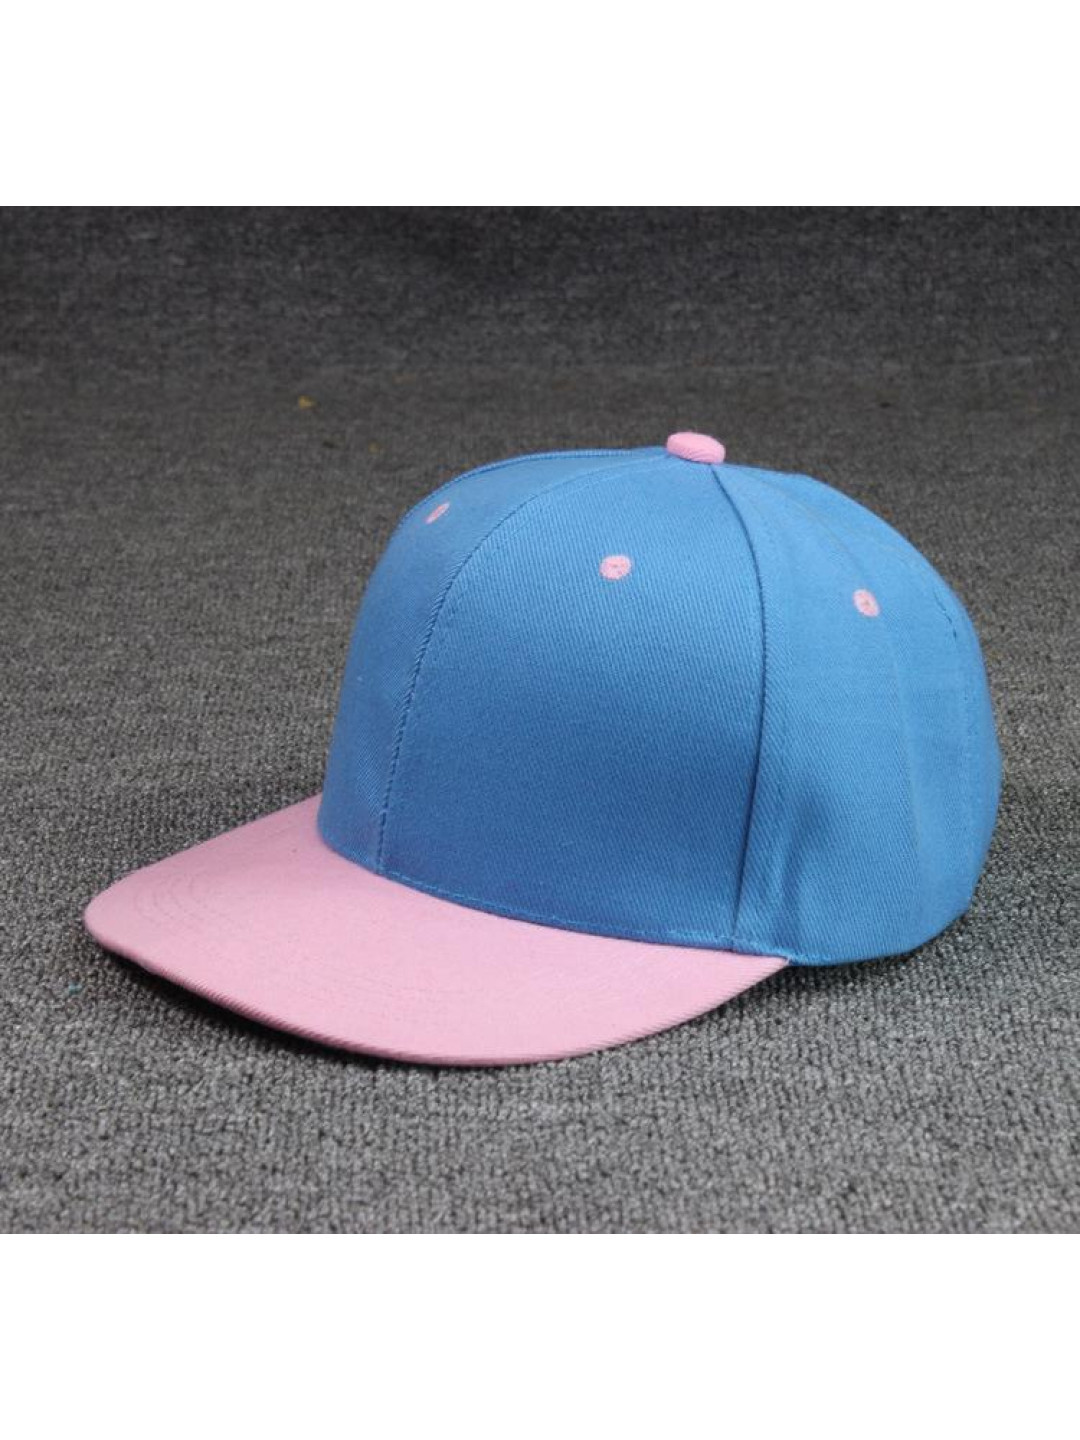 NEW TWO-COLOUR SNAPBACK |ROYALBLUE/PINK